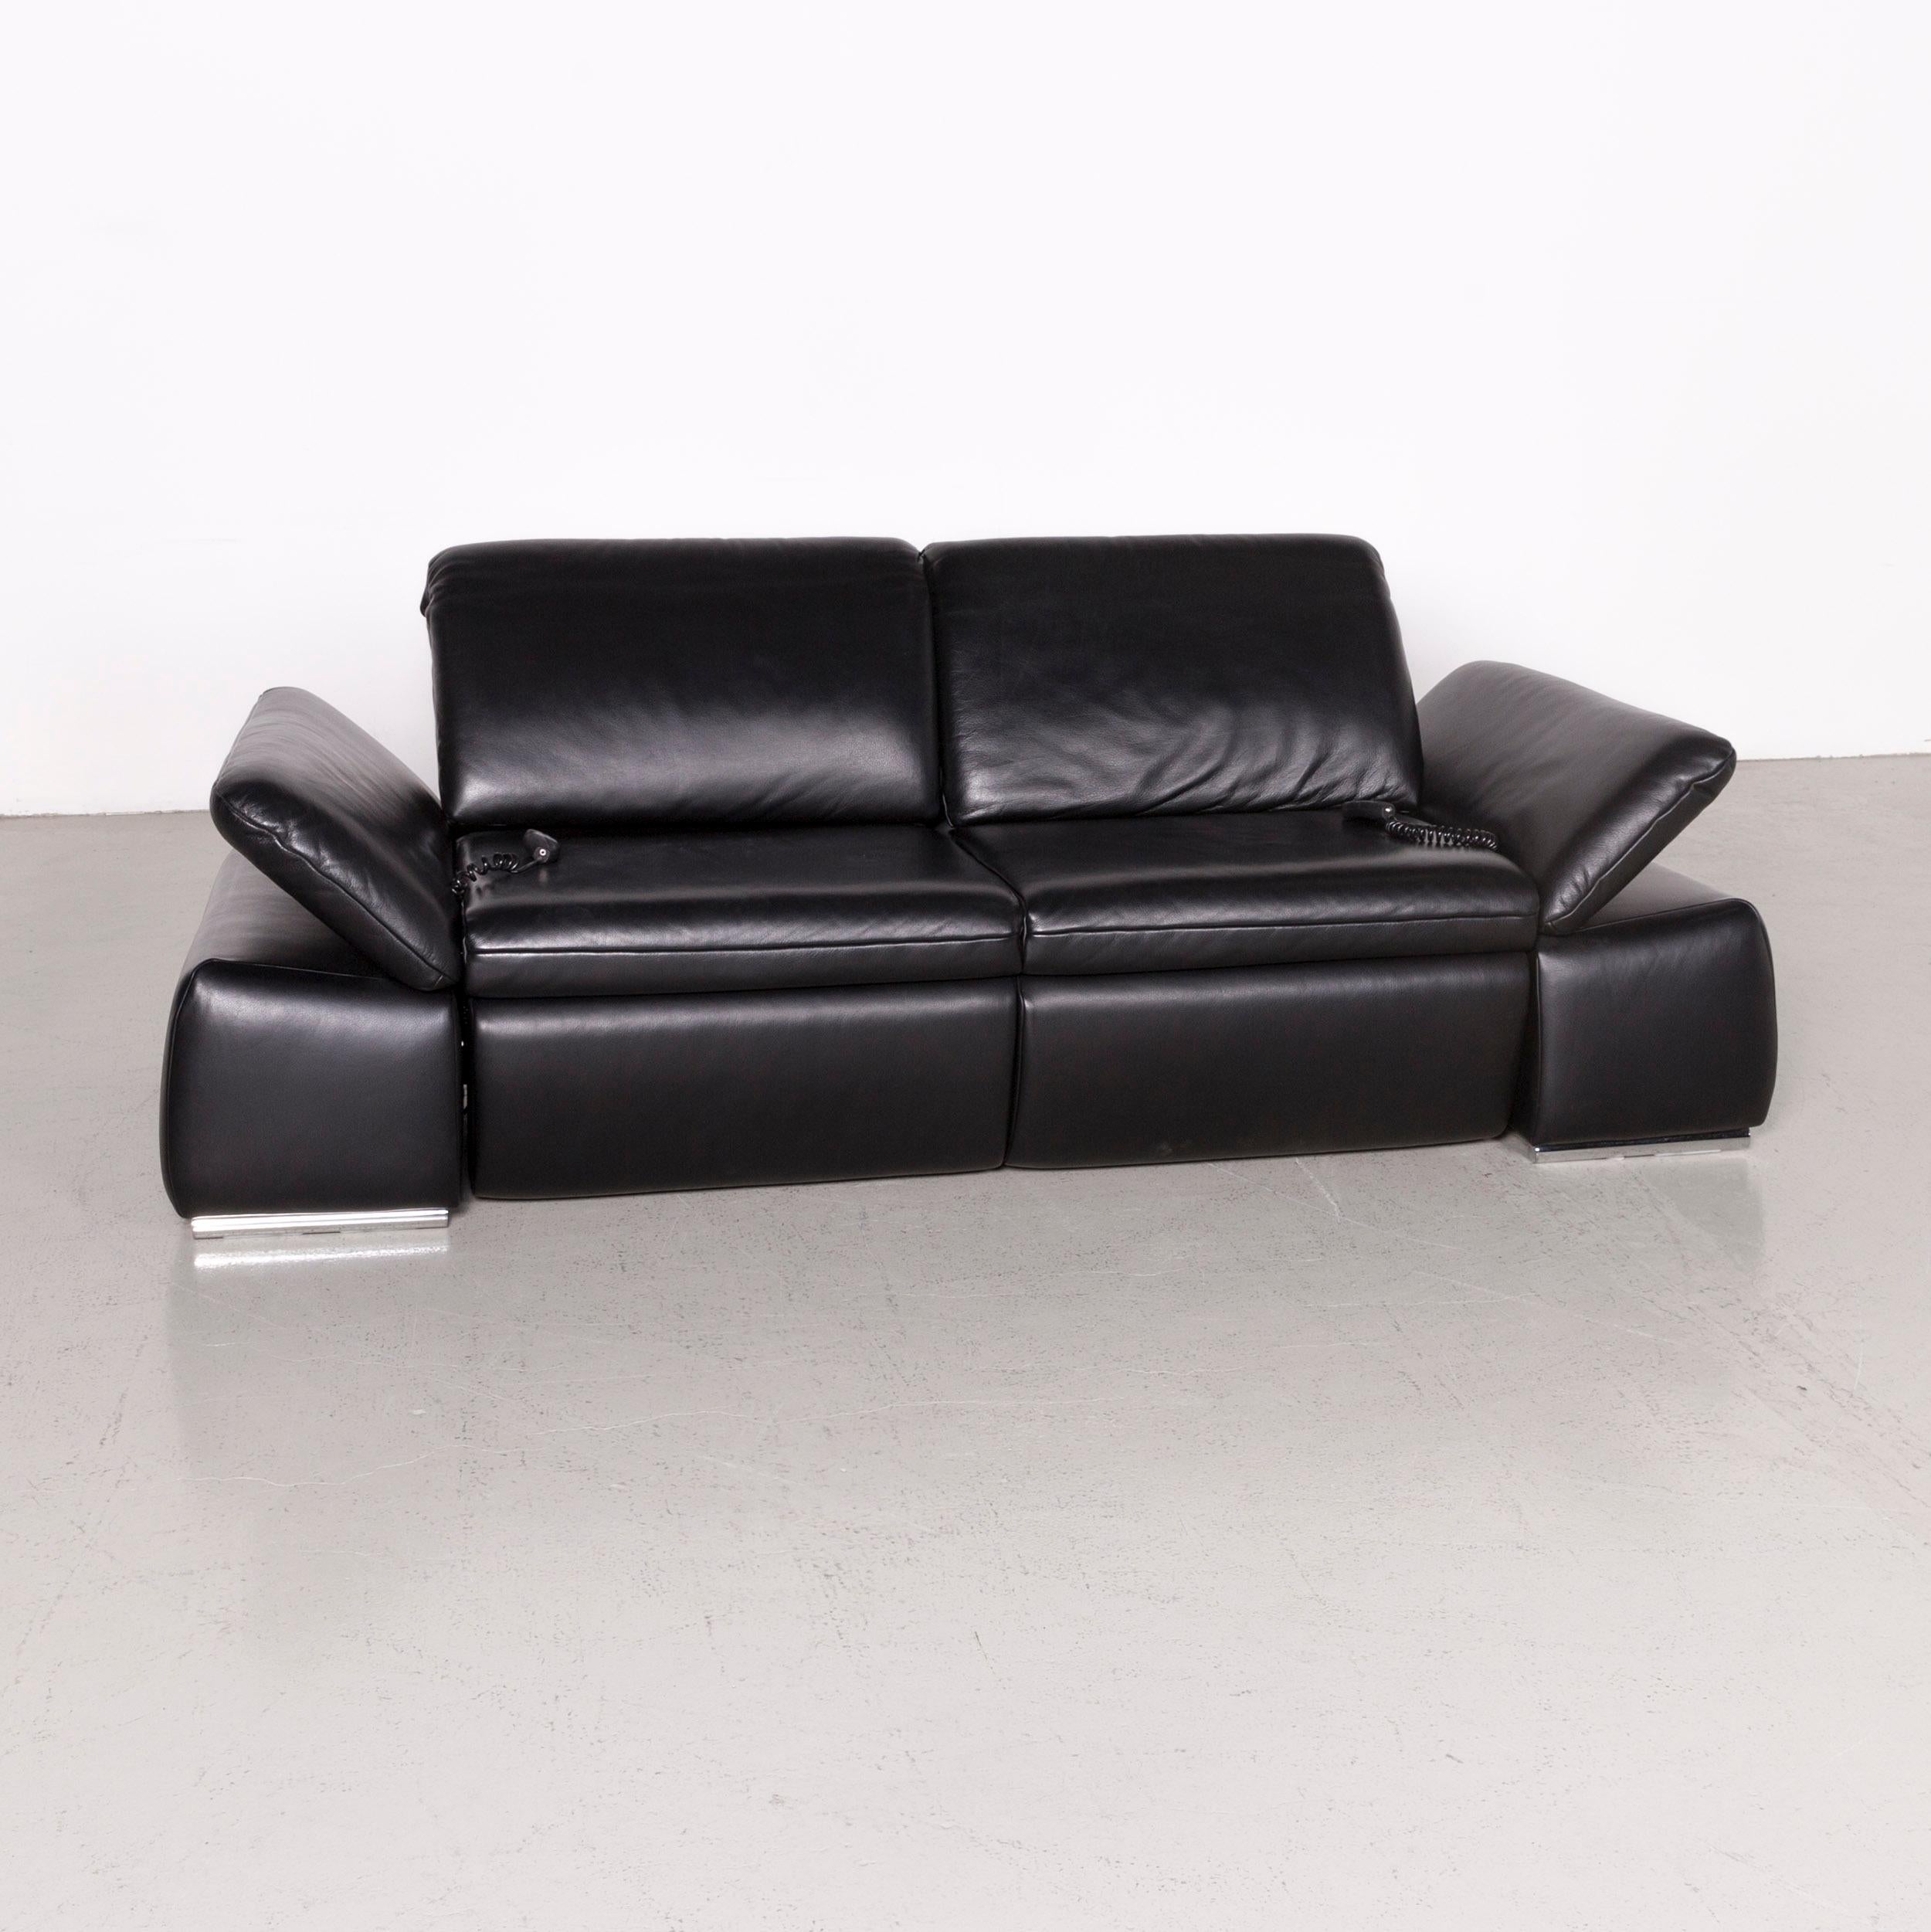 German Koinor Evento Designer Sofa Black Three-Seat Leather Couch Electric Function For Sale